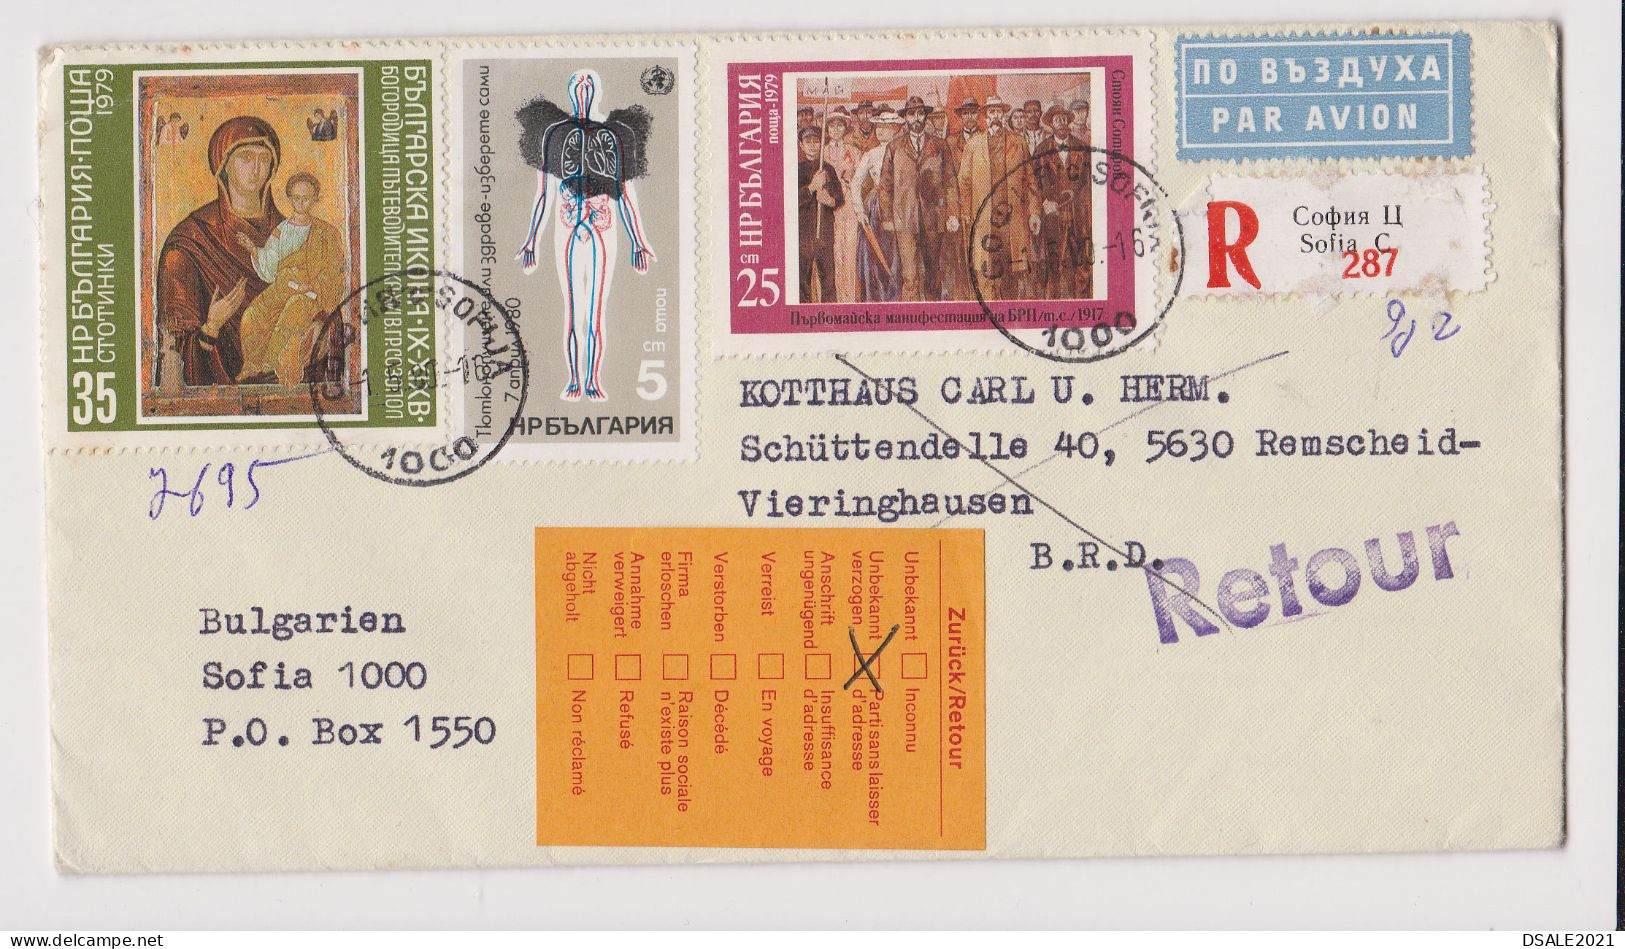 Bulgaria Bulgarien 1980 Registered Airmail Cover W/Colorful Topic Stamps Sent To Germany BRD, Return To Sender (66311) - Covers & Documents